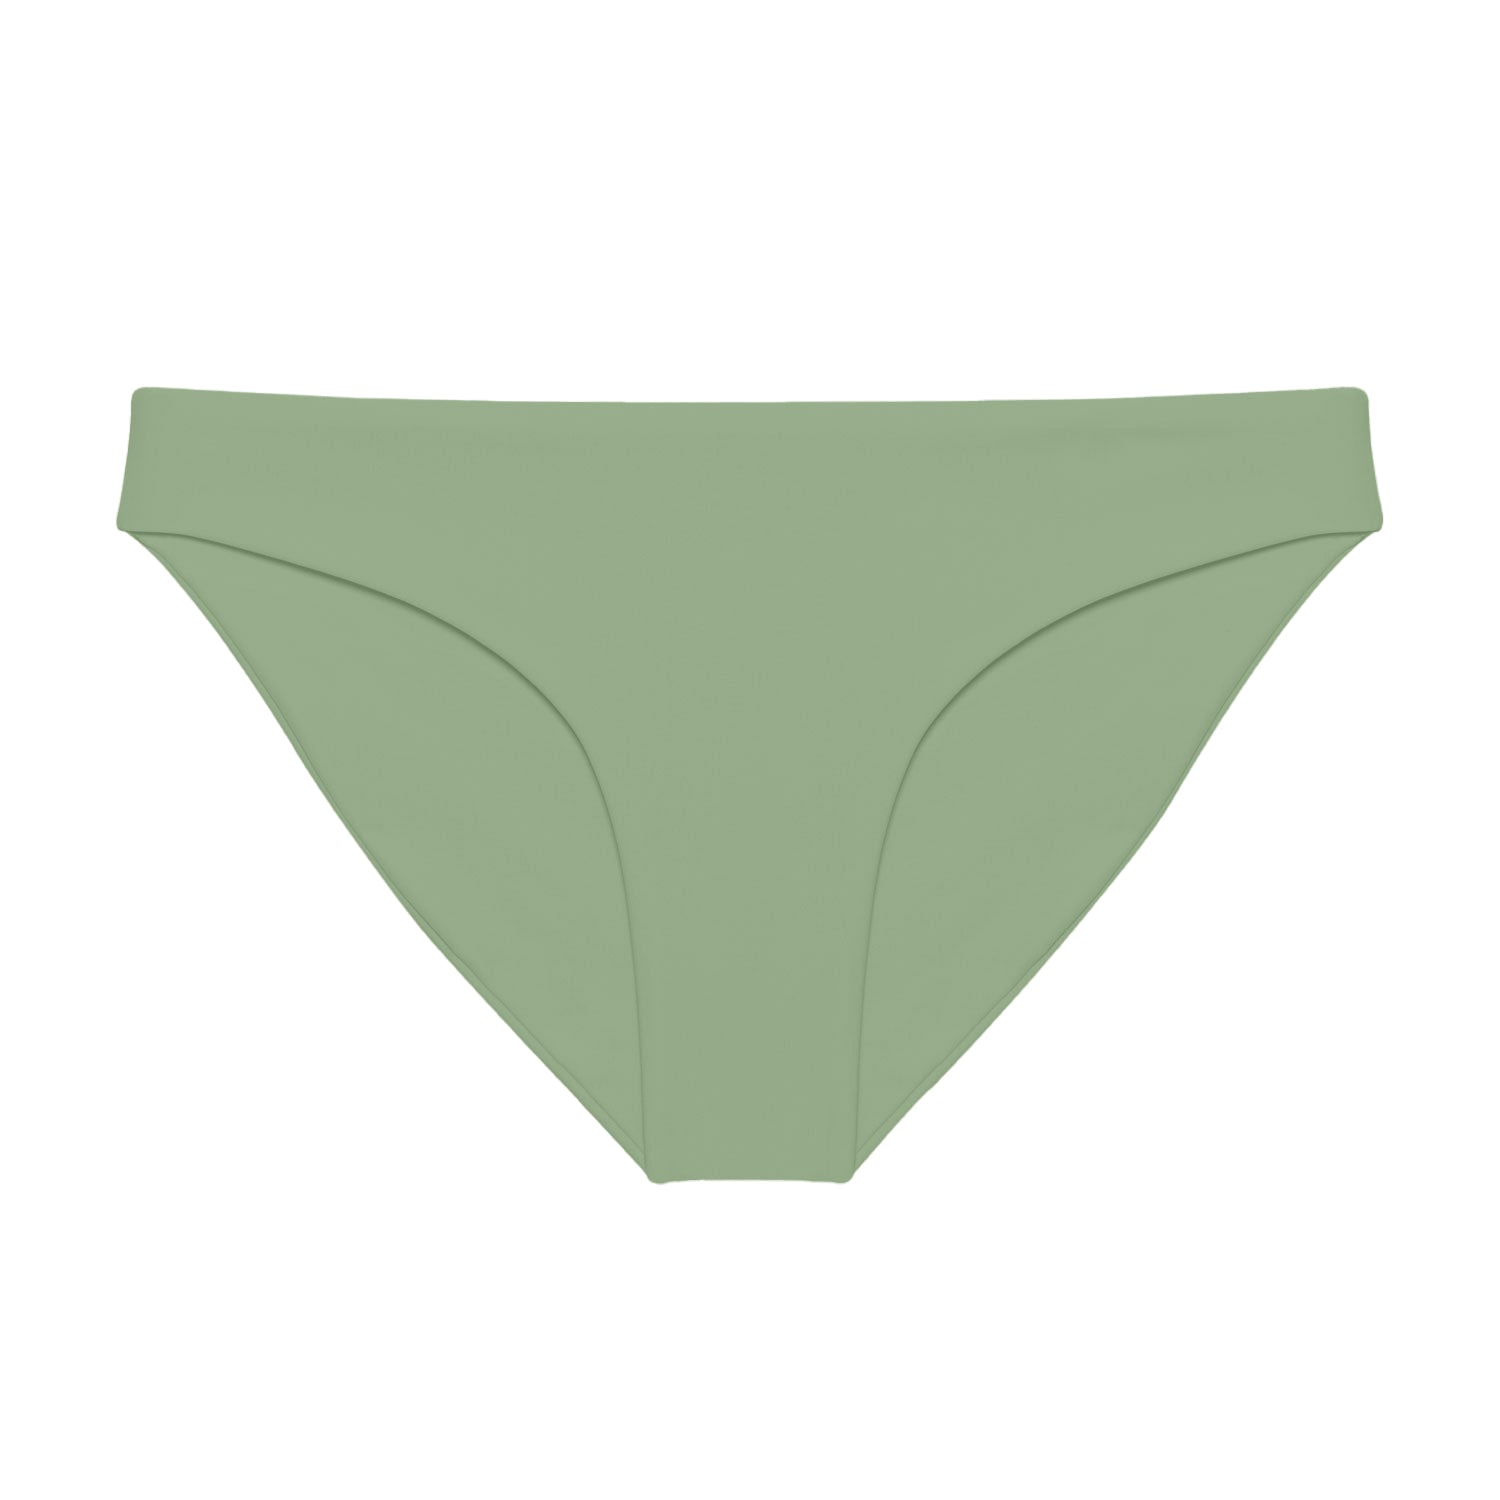 Load image into Gallery viewer, Flat image of the Lure Bottom in olive